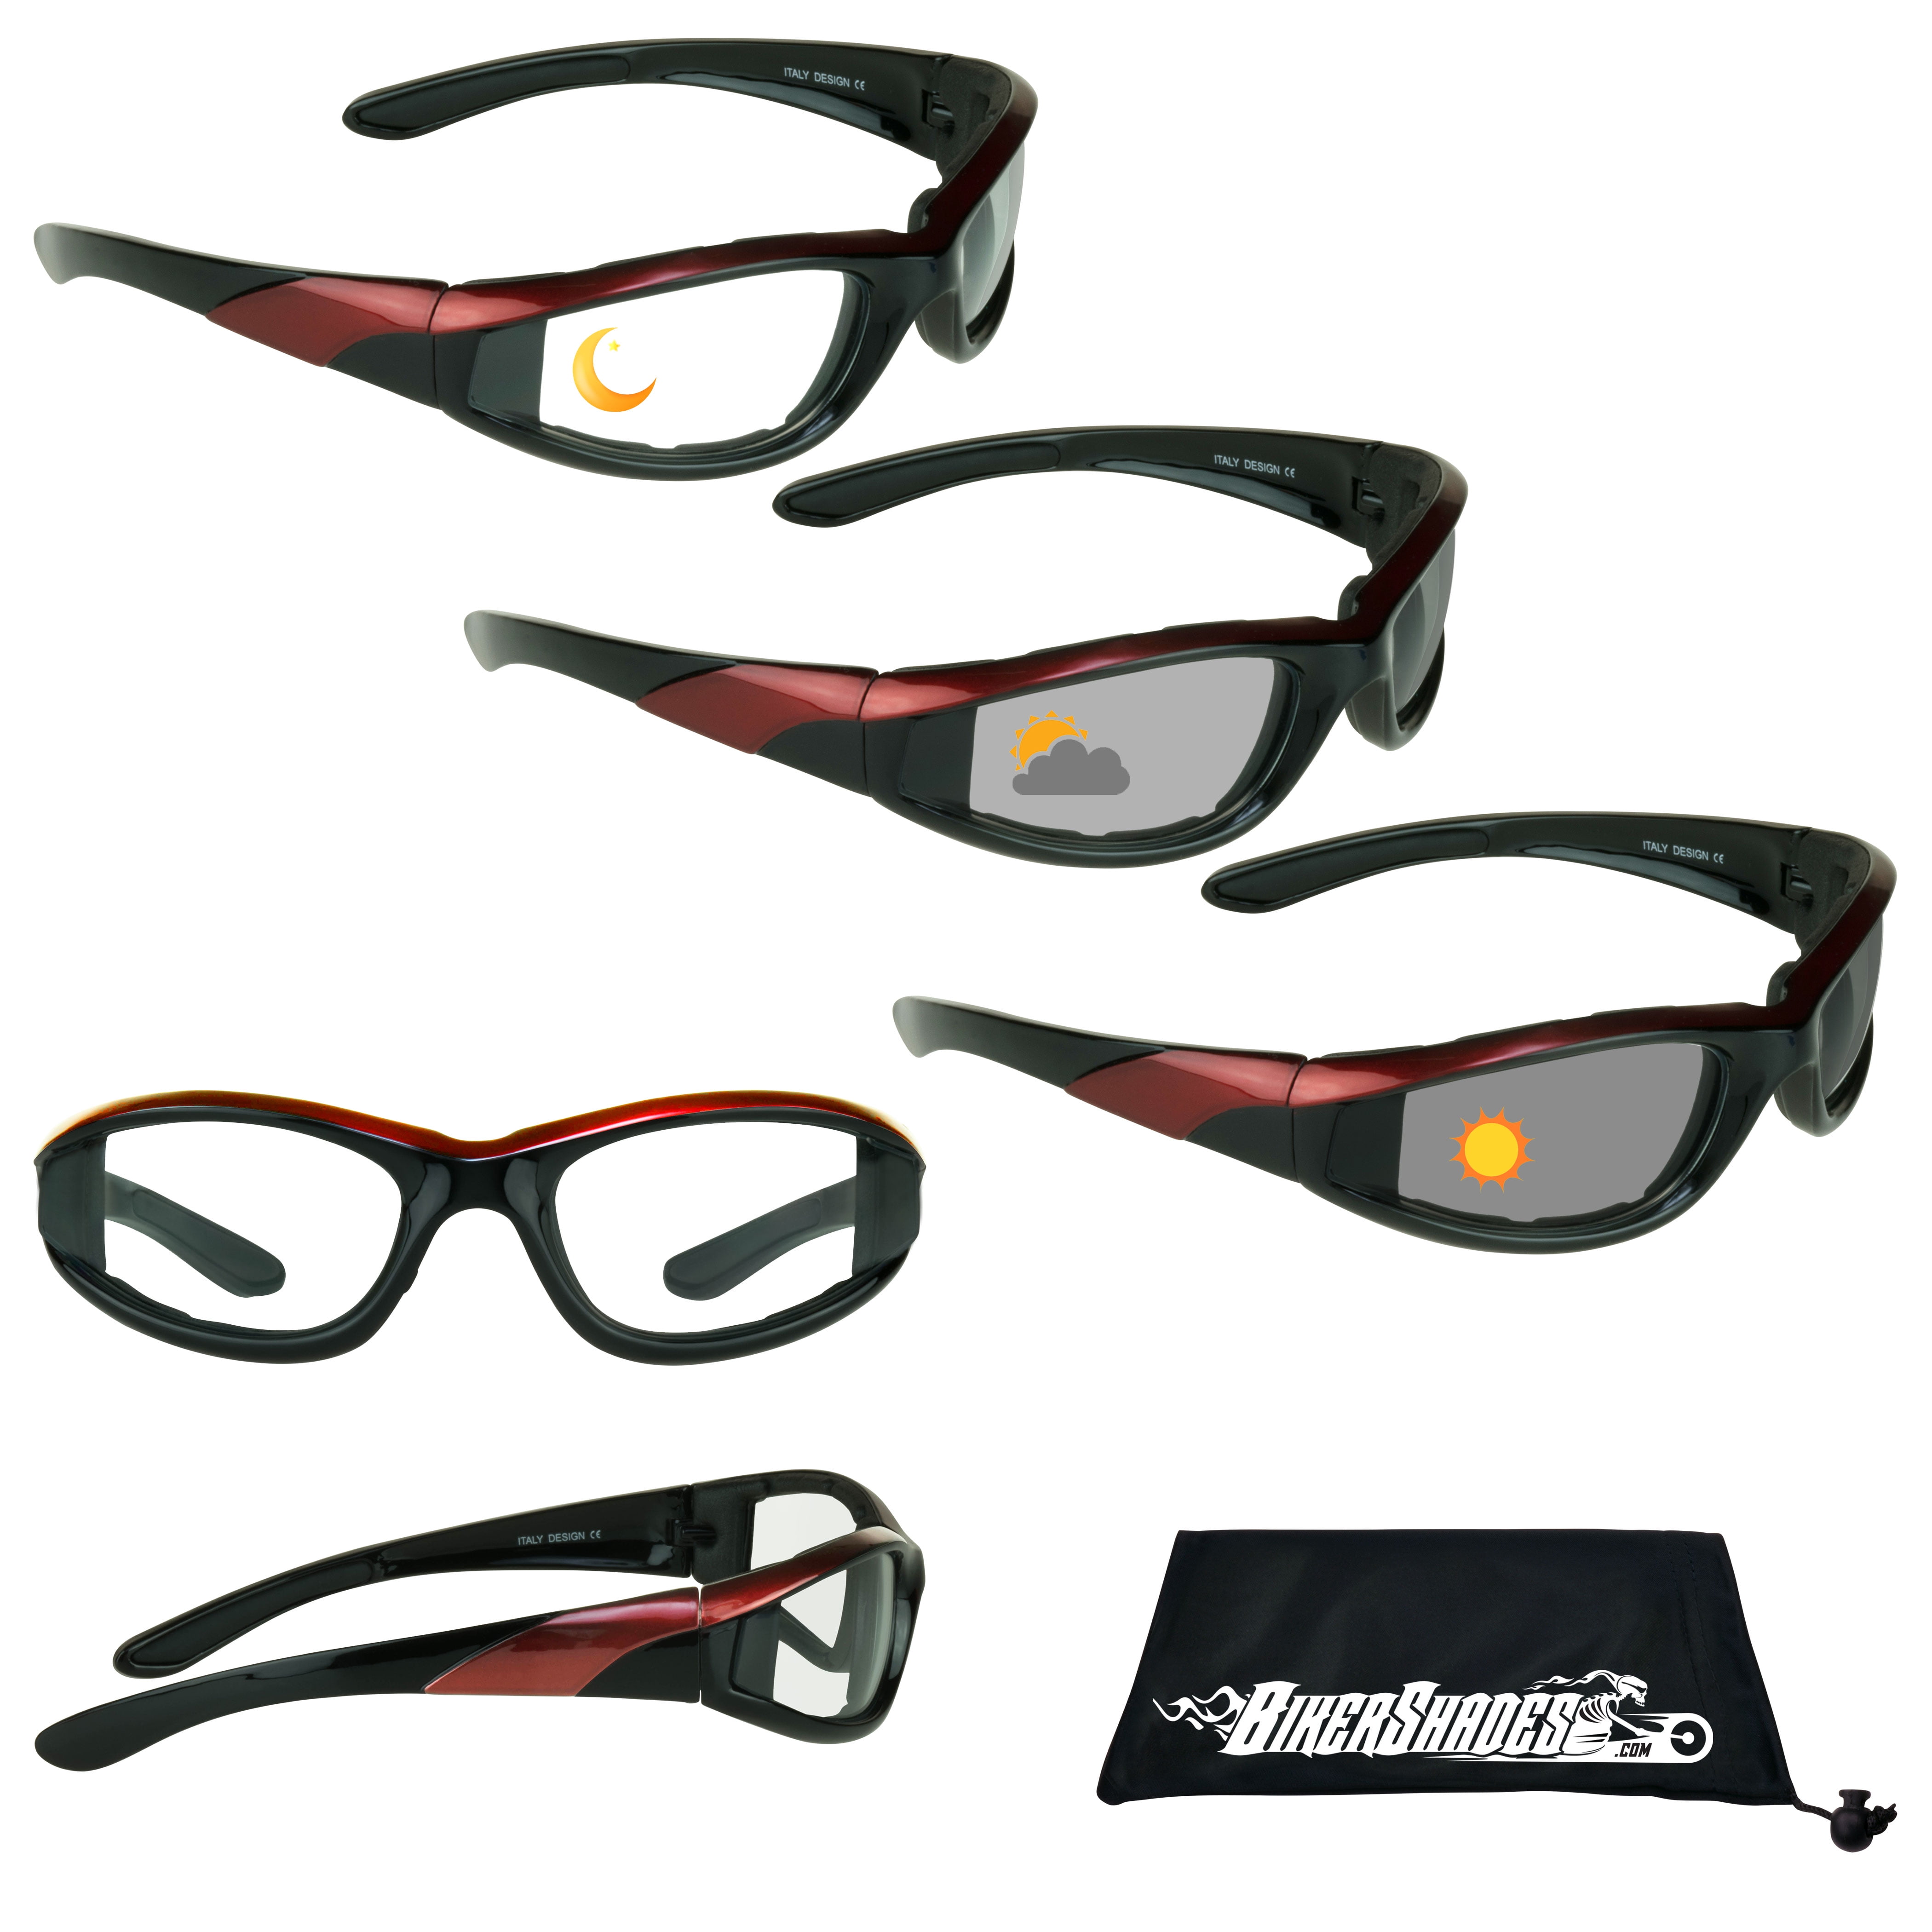 Day Night Transition Motorcycle Sunglasses Biker Goggle Lens Change Color Unisex 